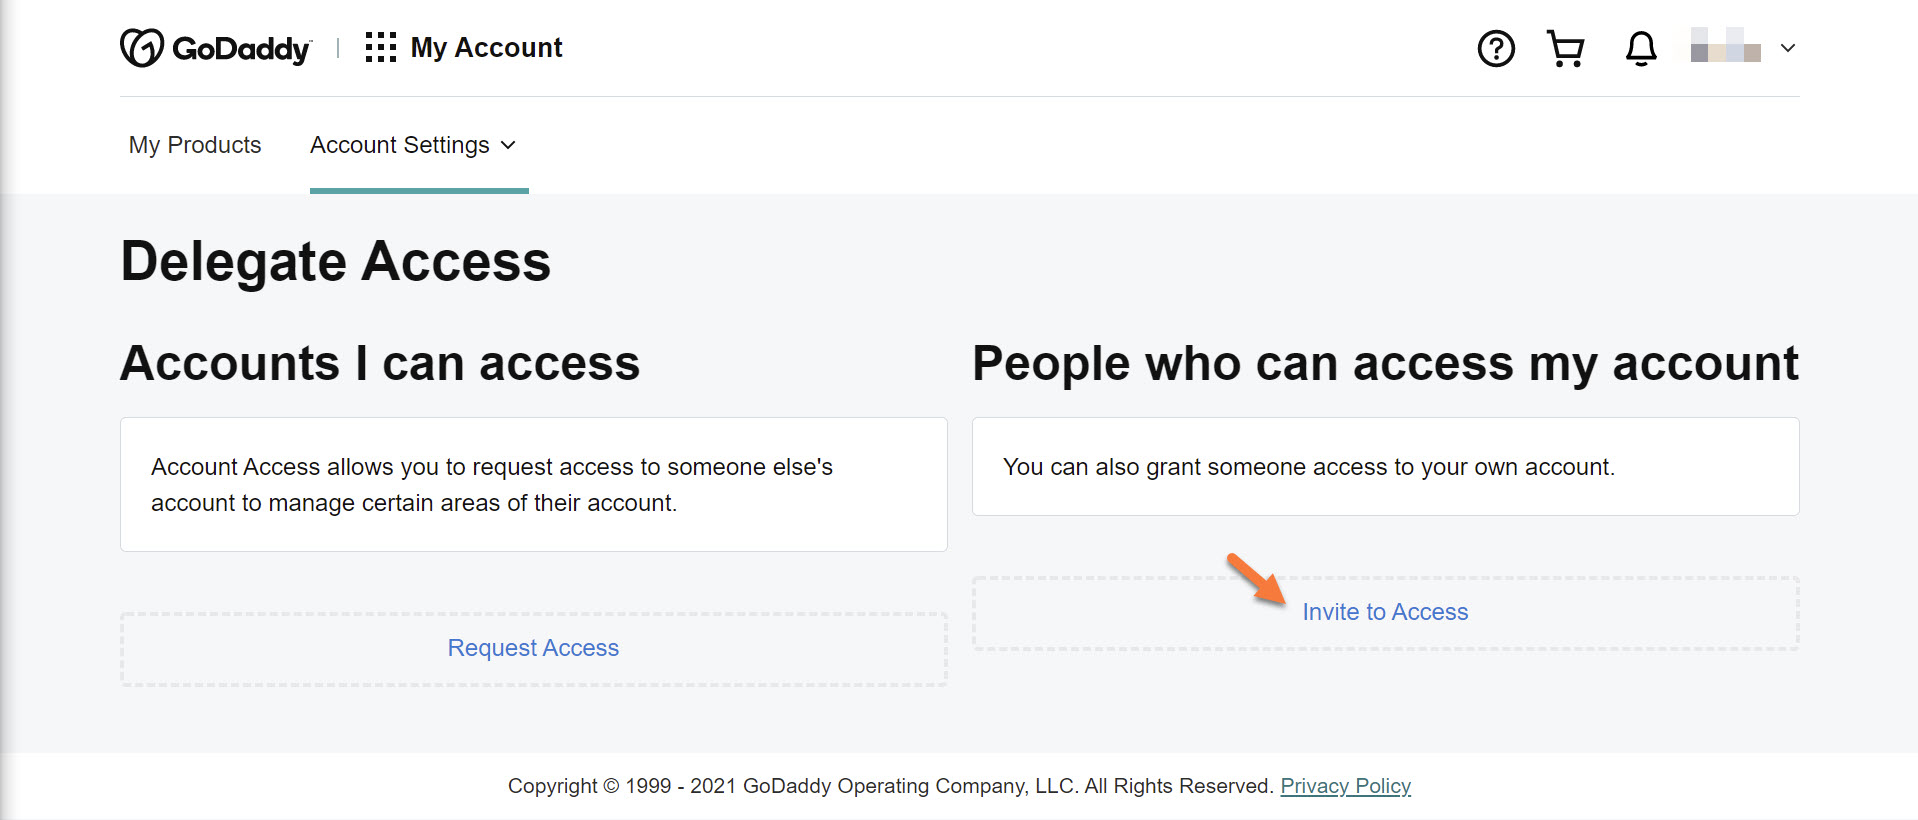 godaddy email access page